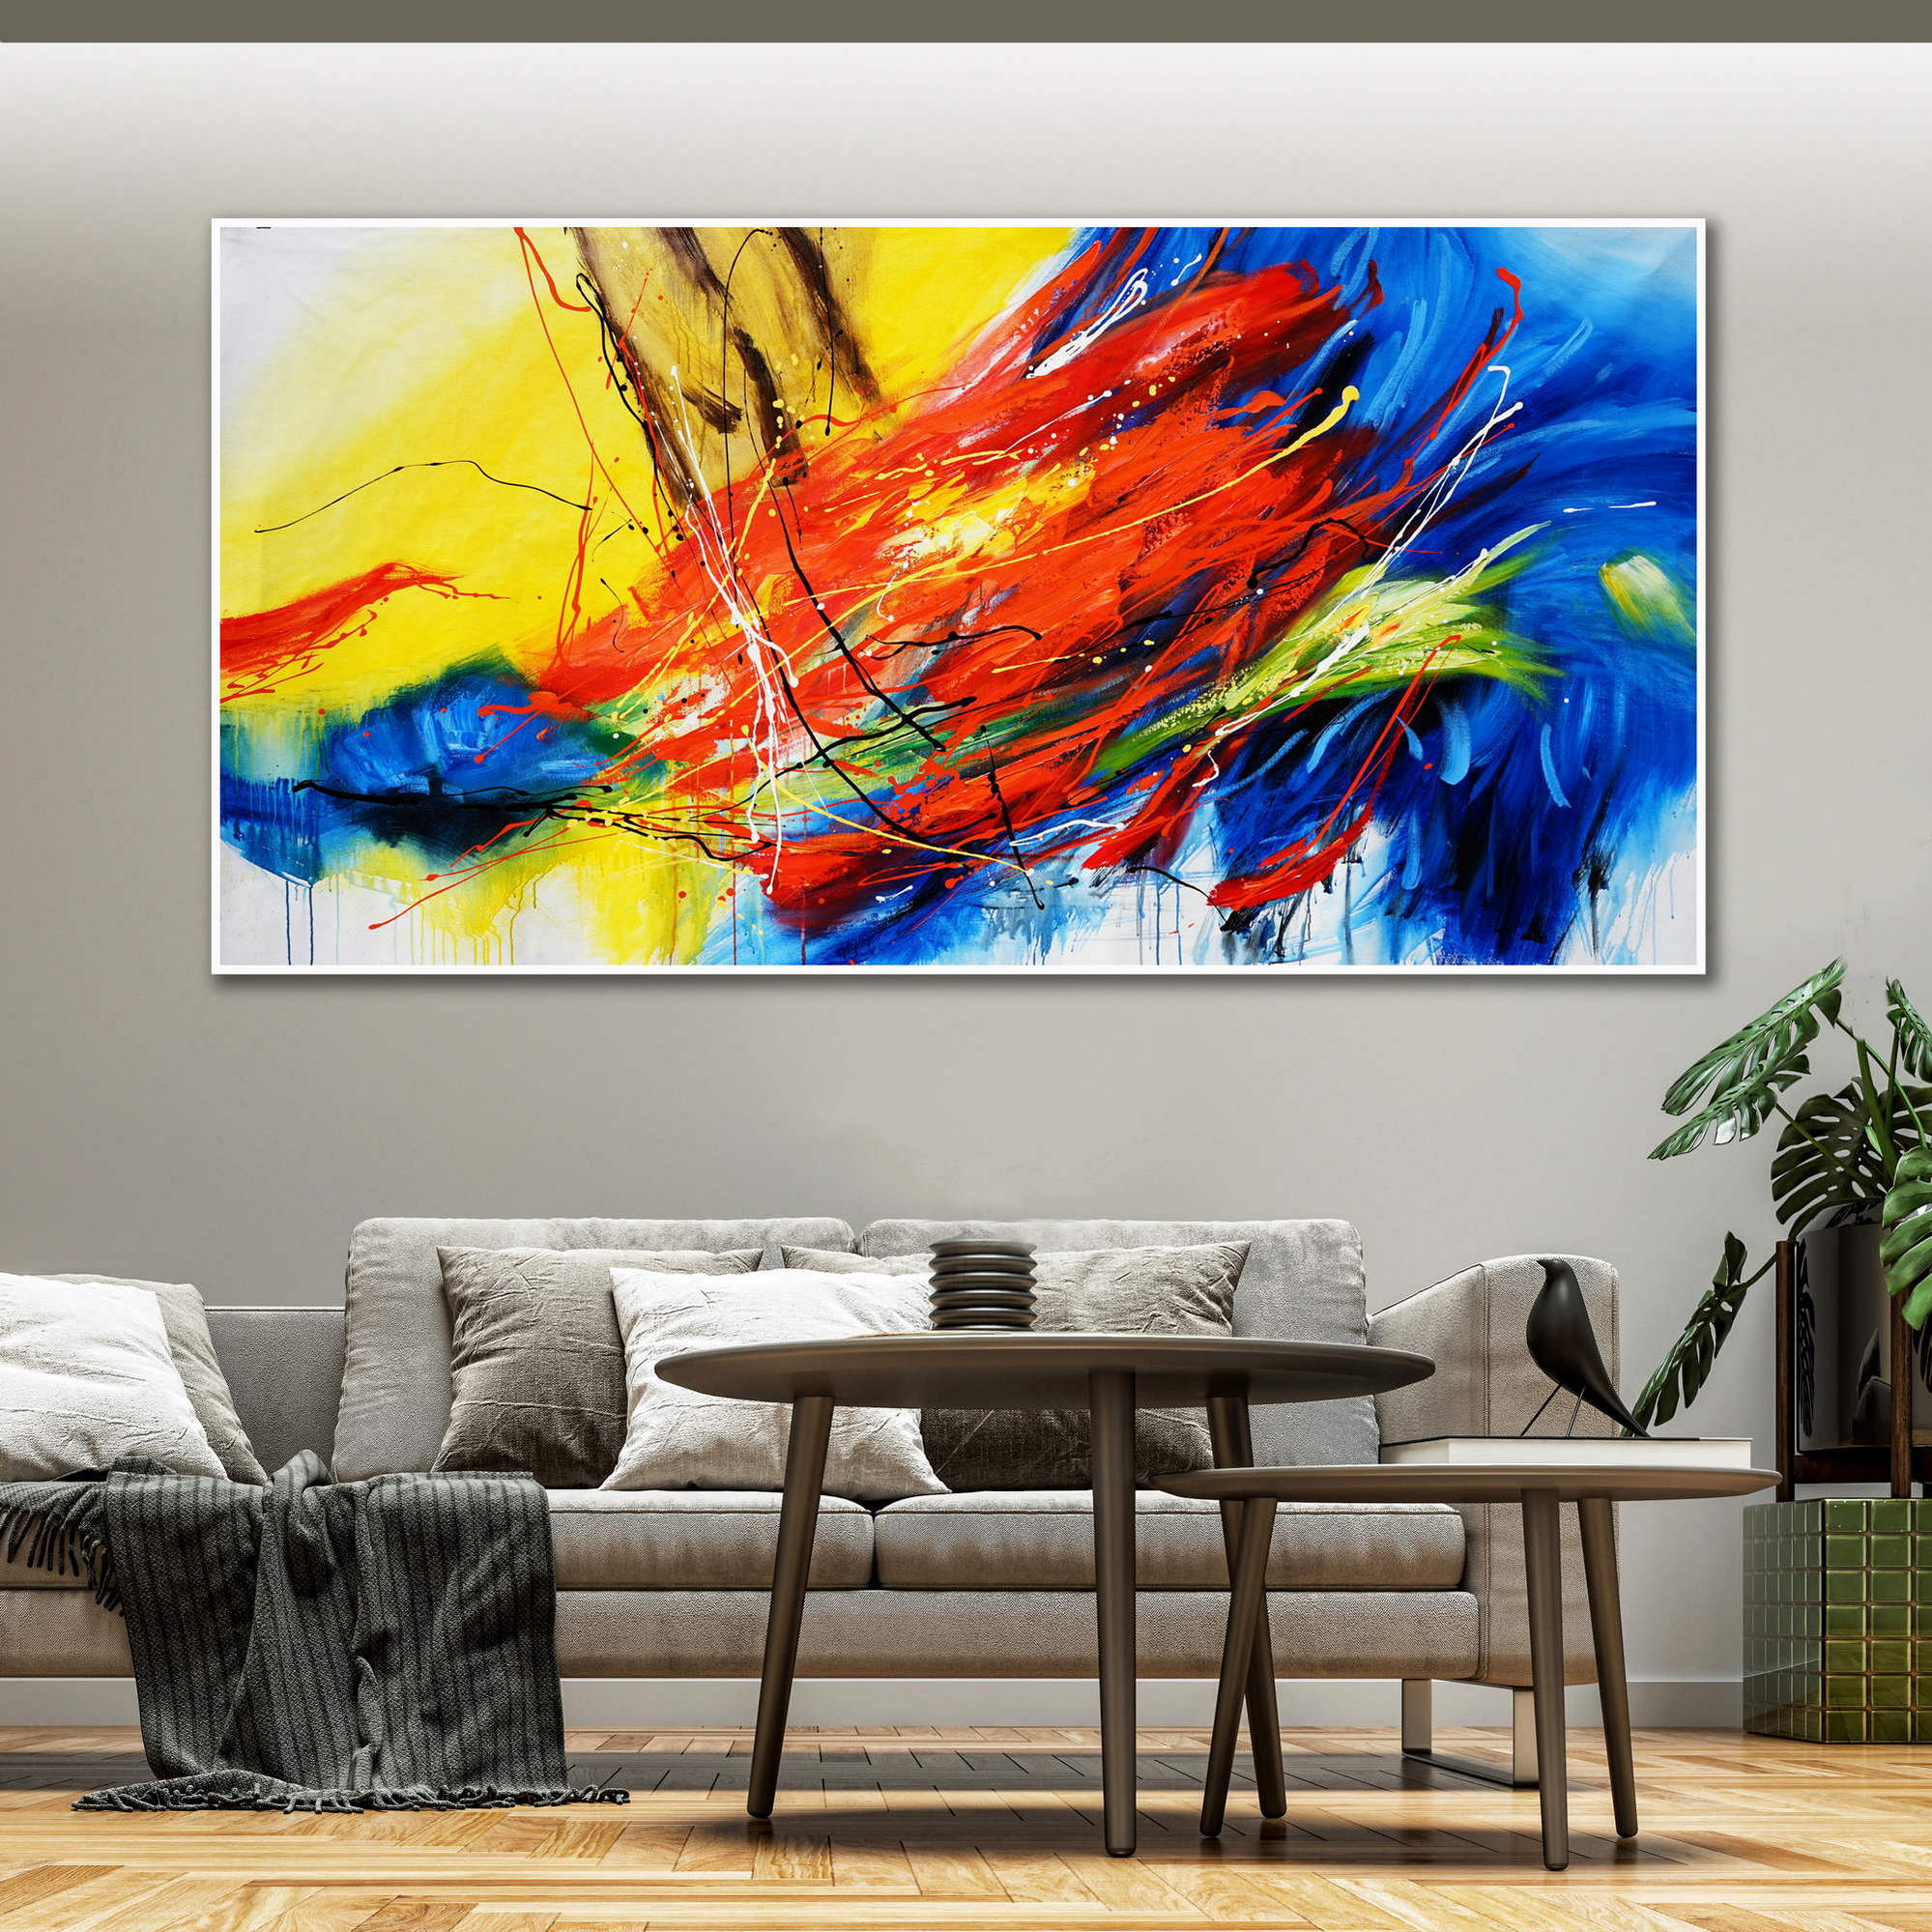 Hand painted Abstract Explosion of colors 120x240cm